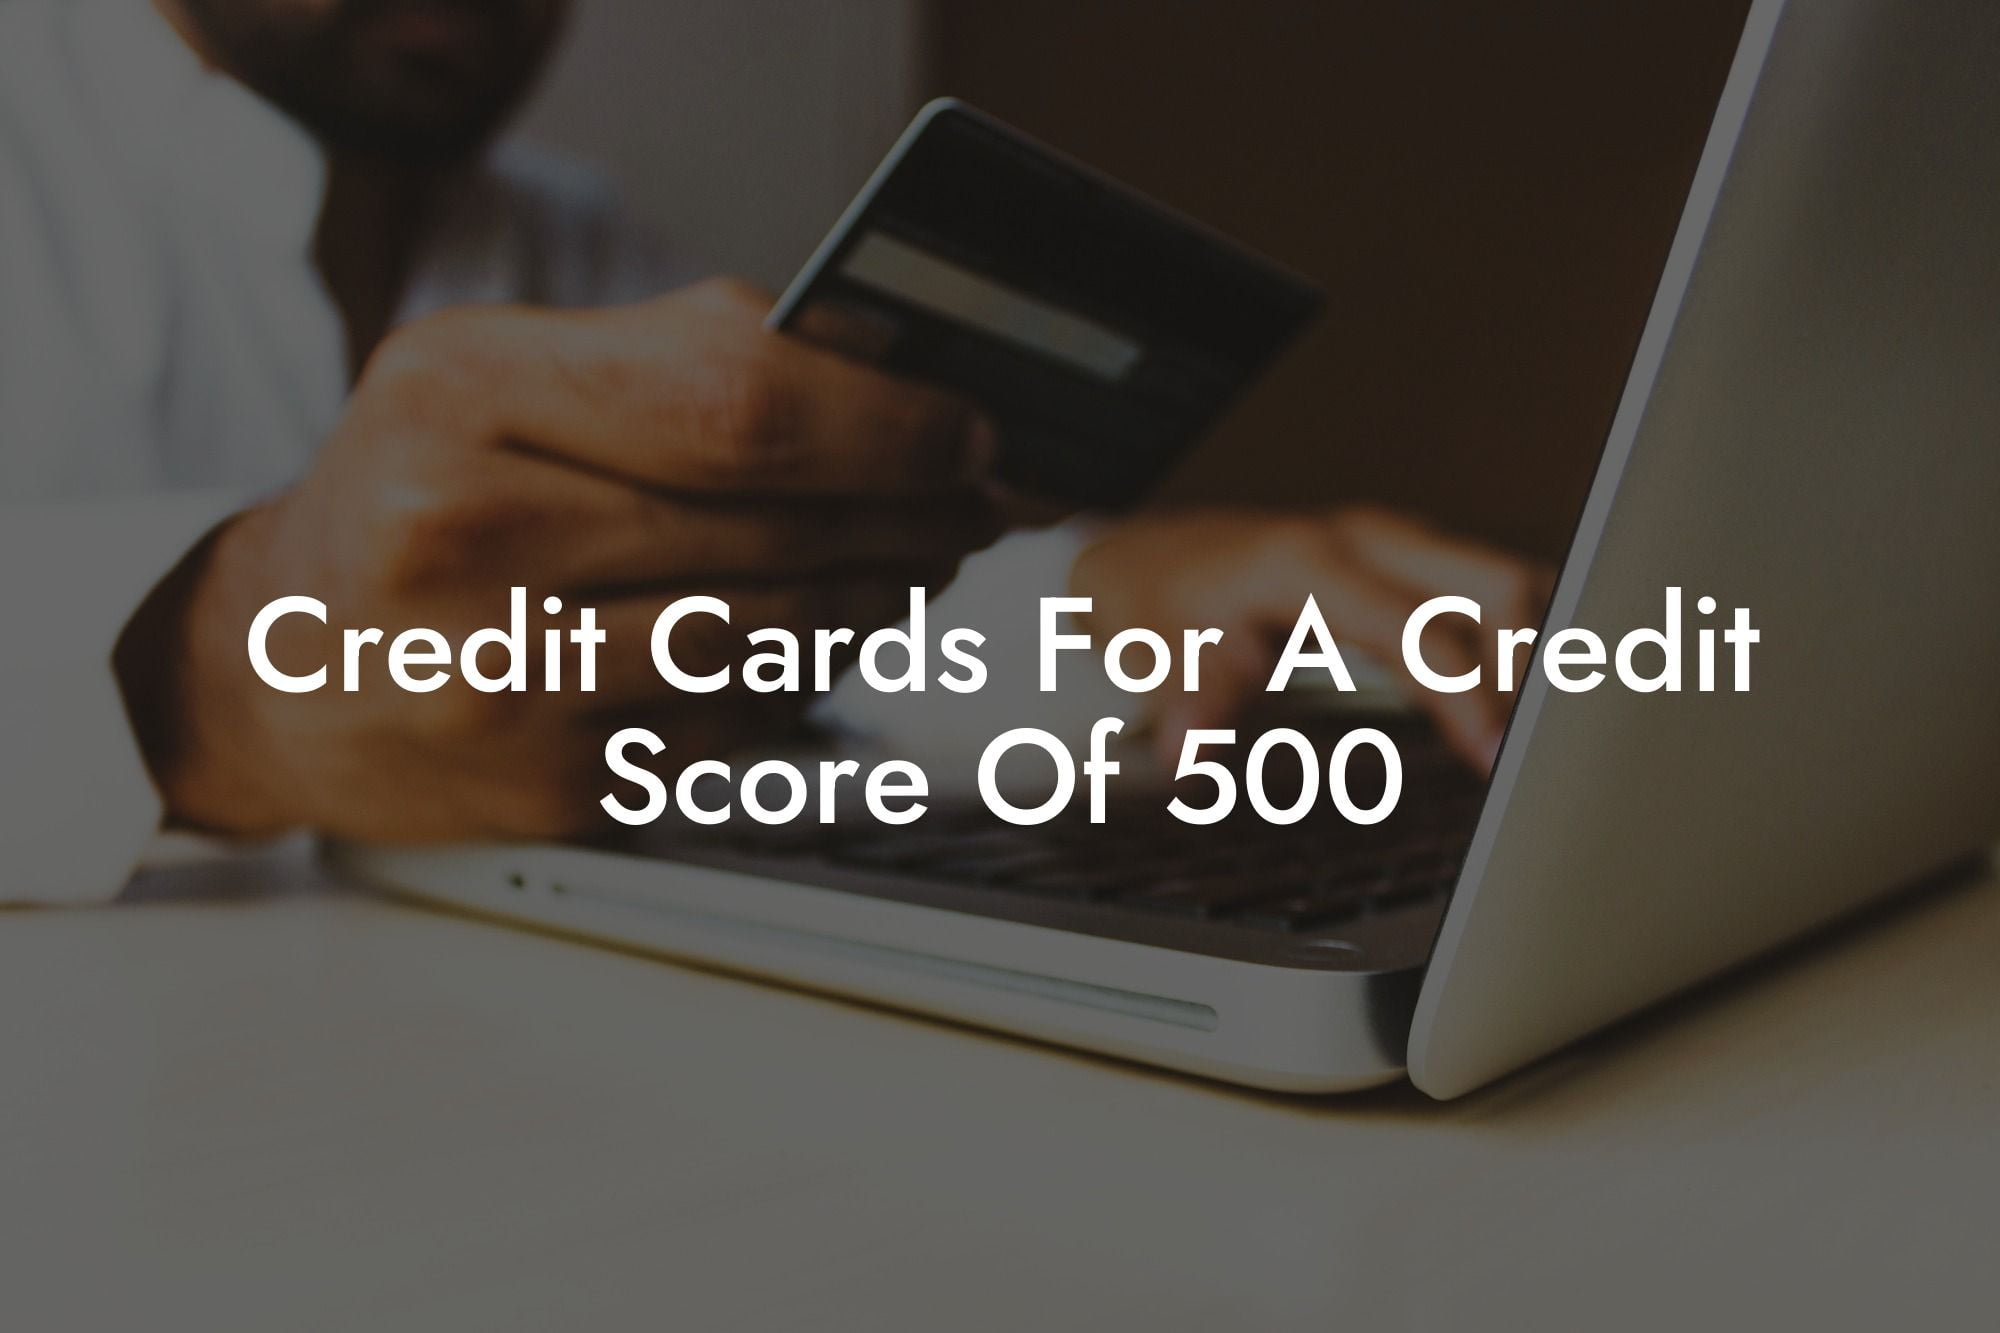 Credit Cards For A Credit Score Of 500